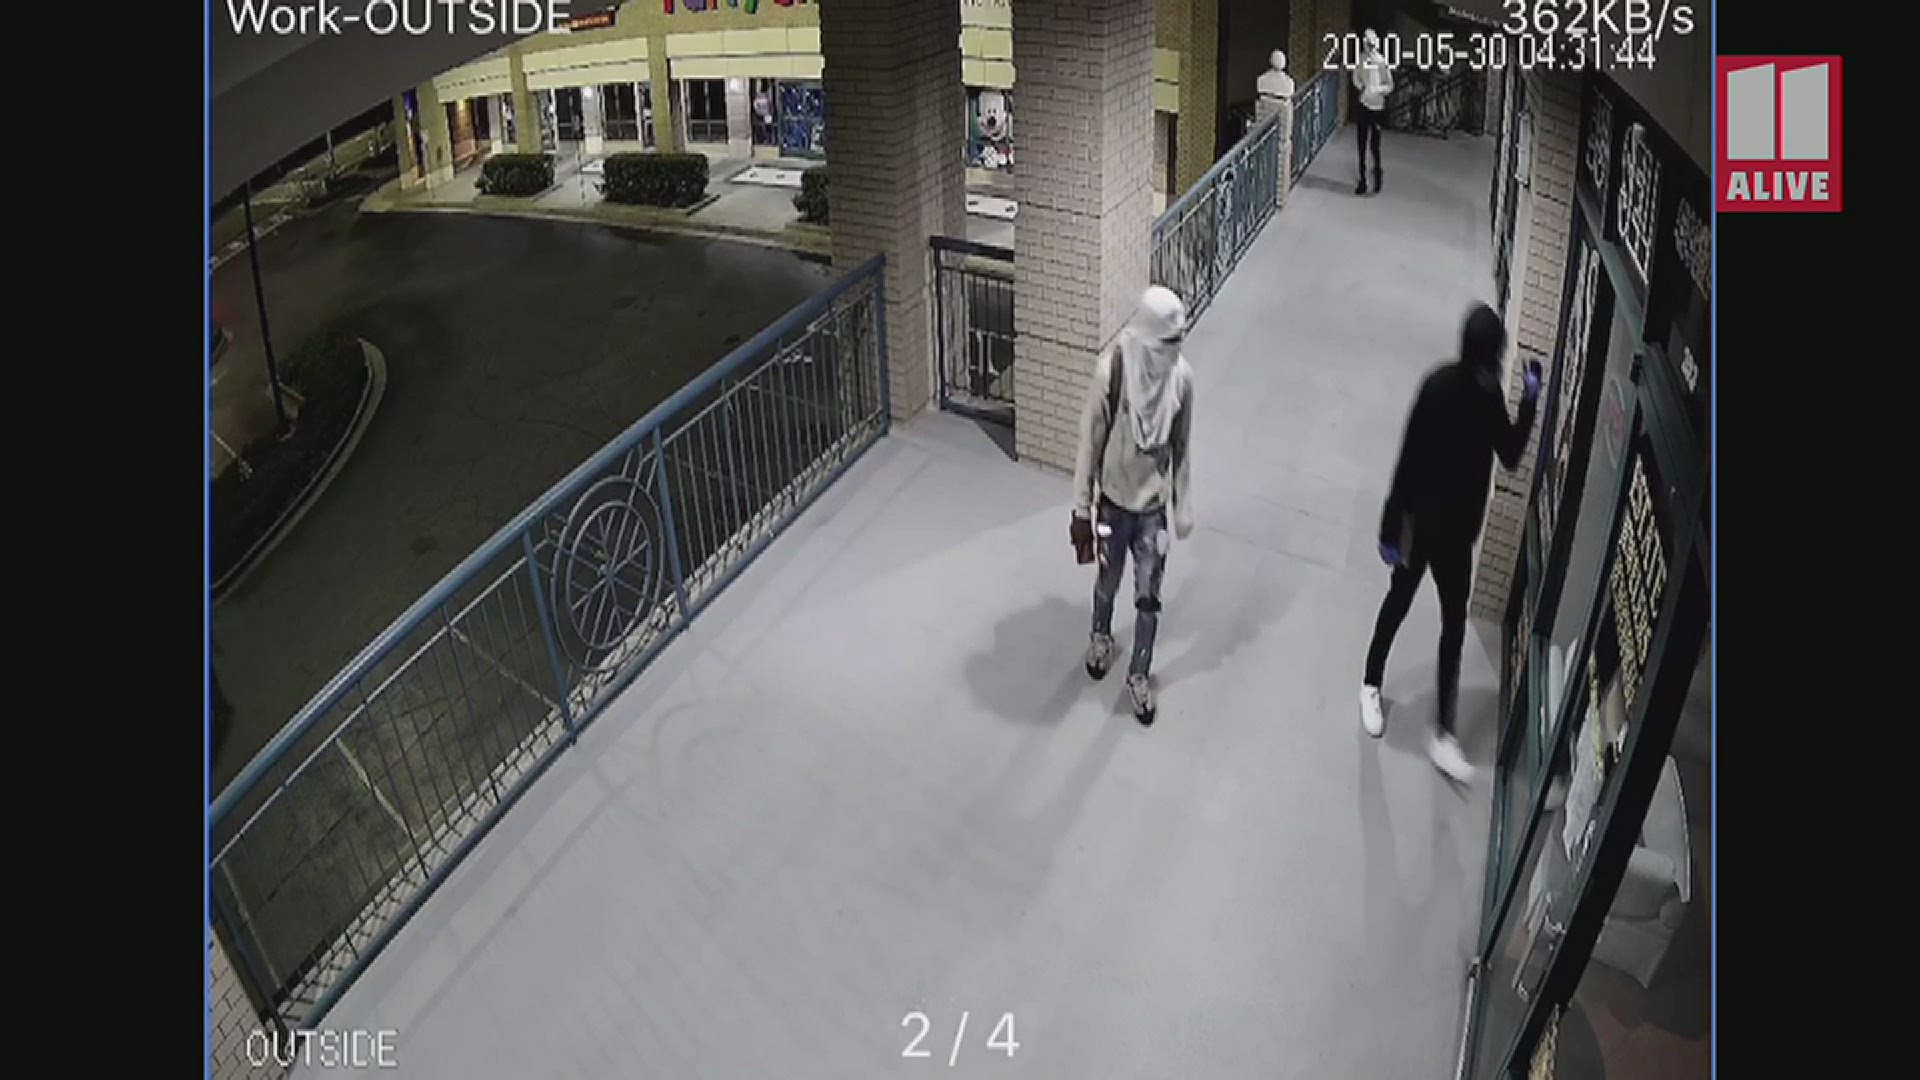 About a dozen suspects were seen on surveillance video breaking into a Buckhead jewelry store and taking off with thousands of dollars worth of merchandise.